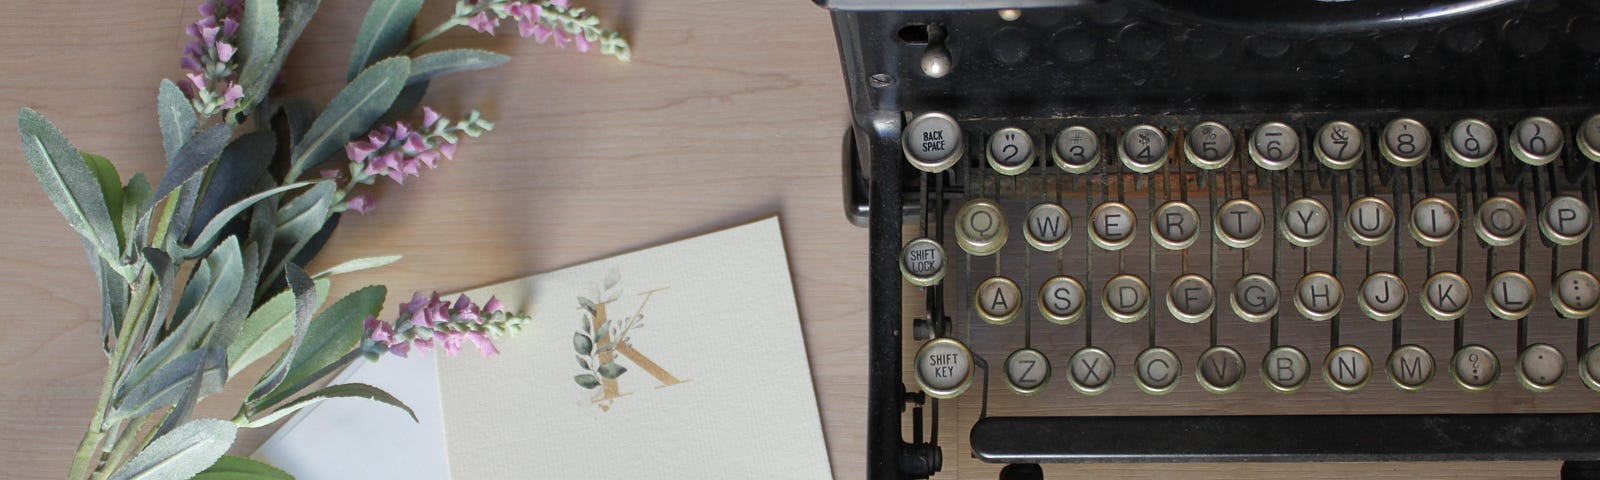 An antique typewriter sits on a wooden desk with a pad of paper and a sprig of purple flowers.